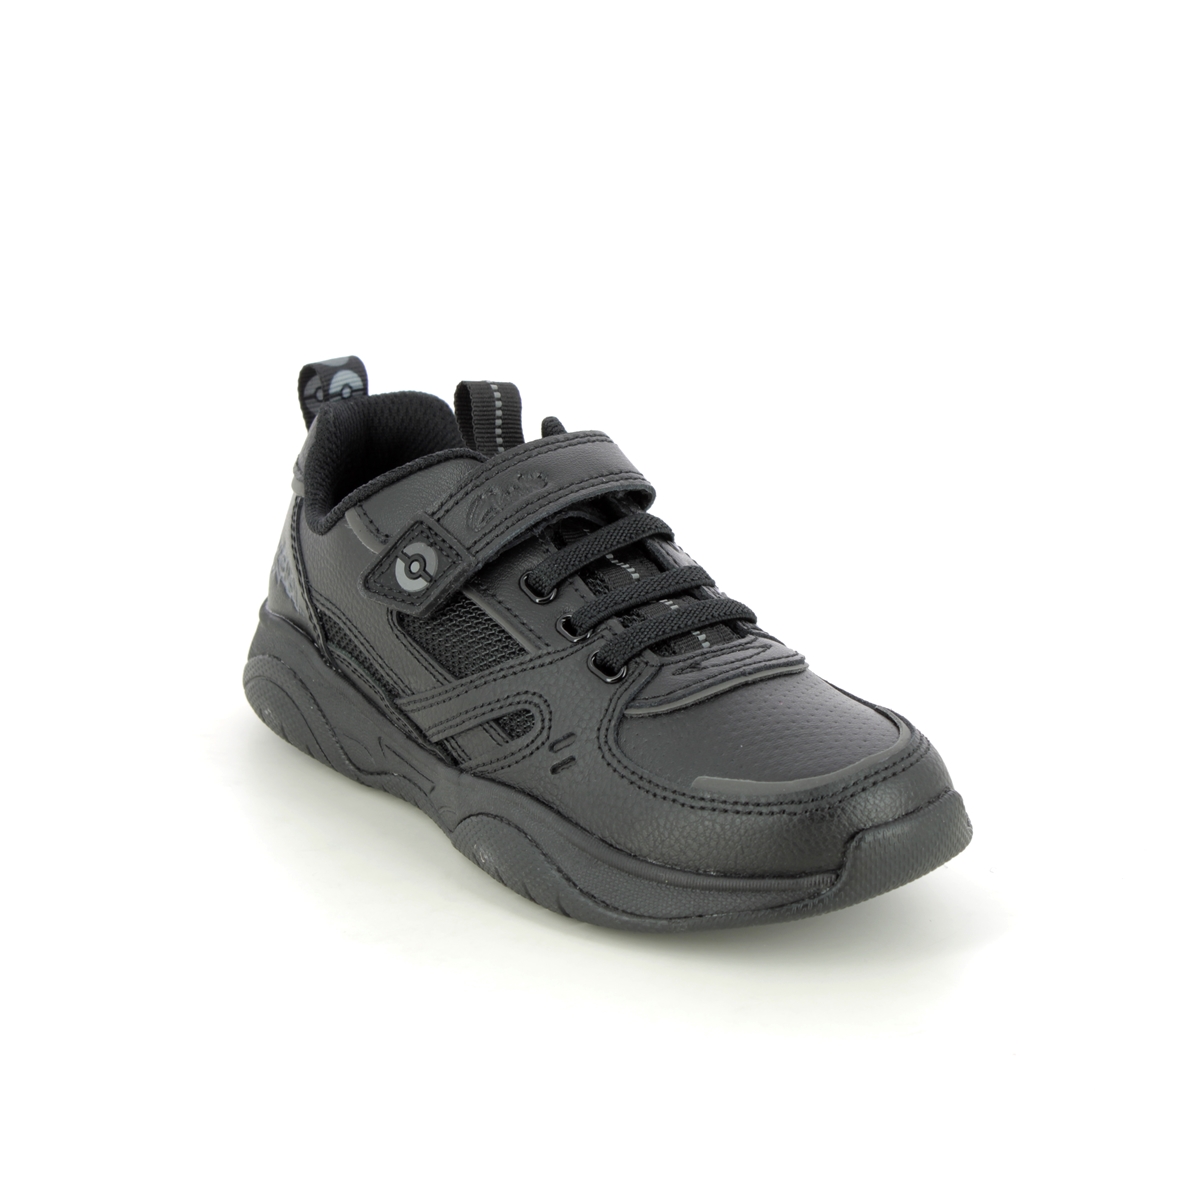 Clarks Pokemon Grip Trade K Black Leather Kids Boys Trainers 693486F In Size 9 In Plain Black Leather F Width Fitting Regular Fit For School For kids